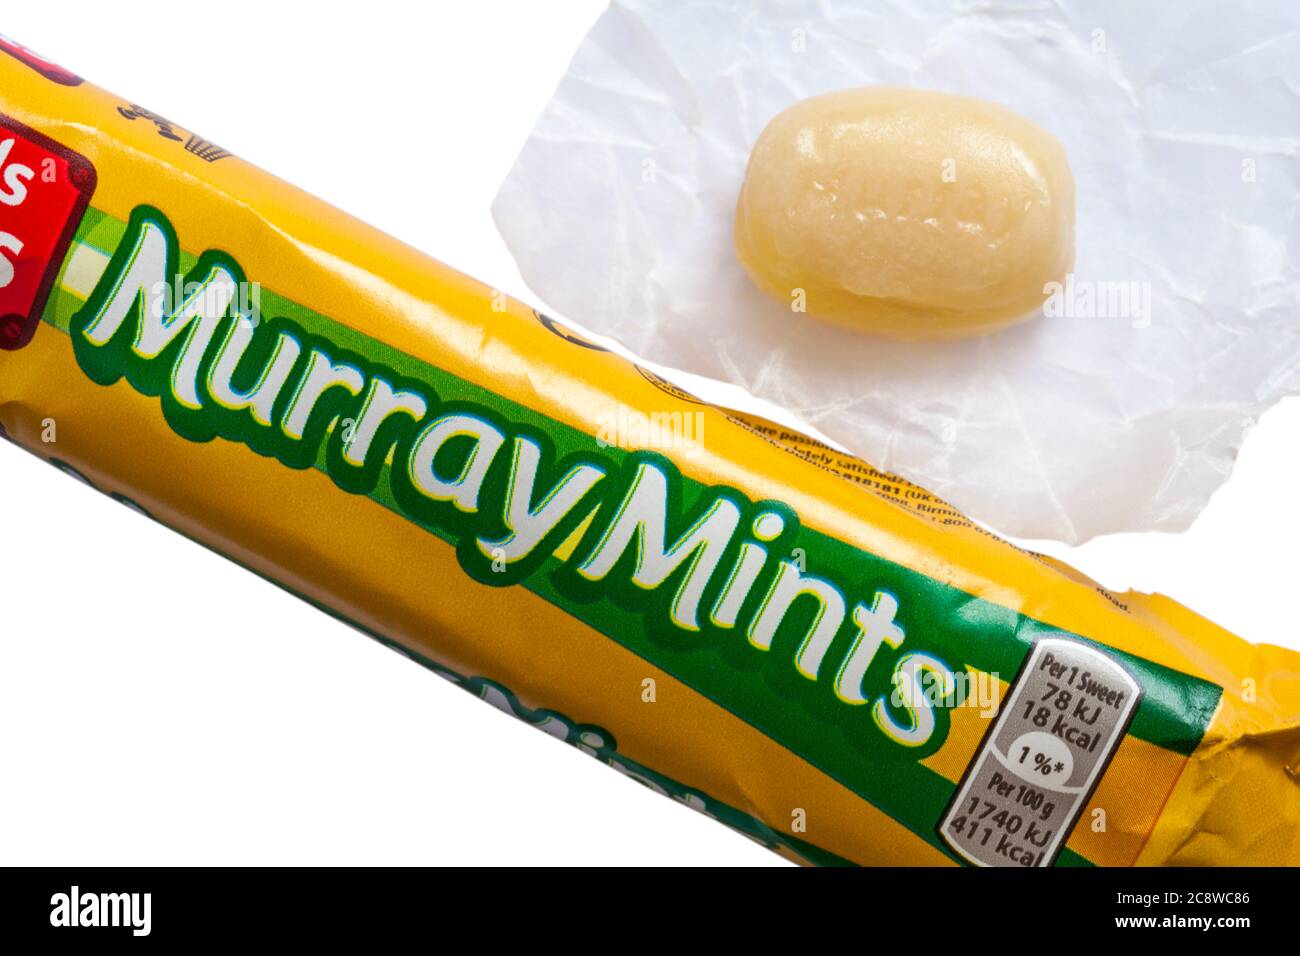 Packet of Maynards Bassetts Murray Mints opened with one mint removed and unwrapped on white background Stock Photo